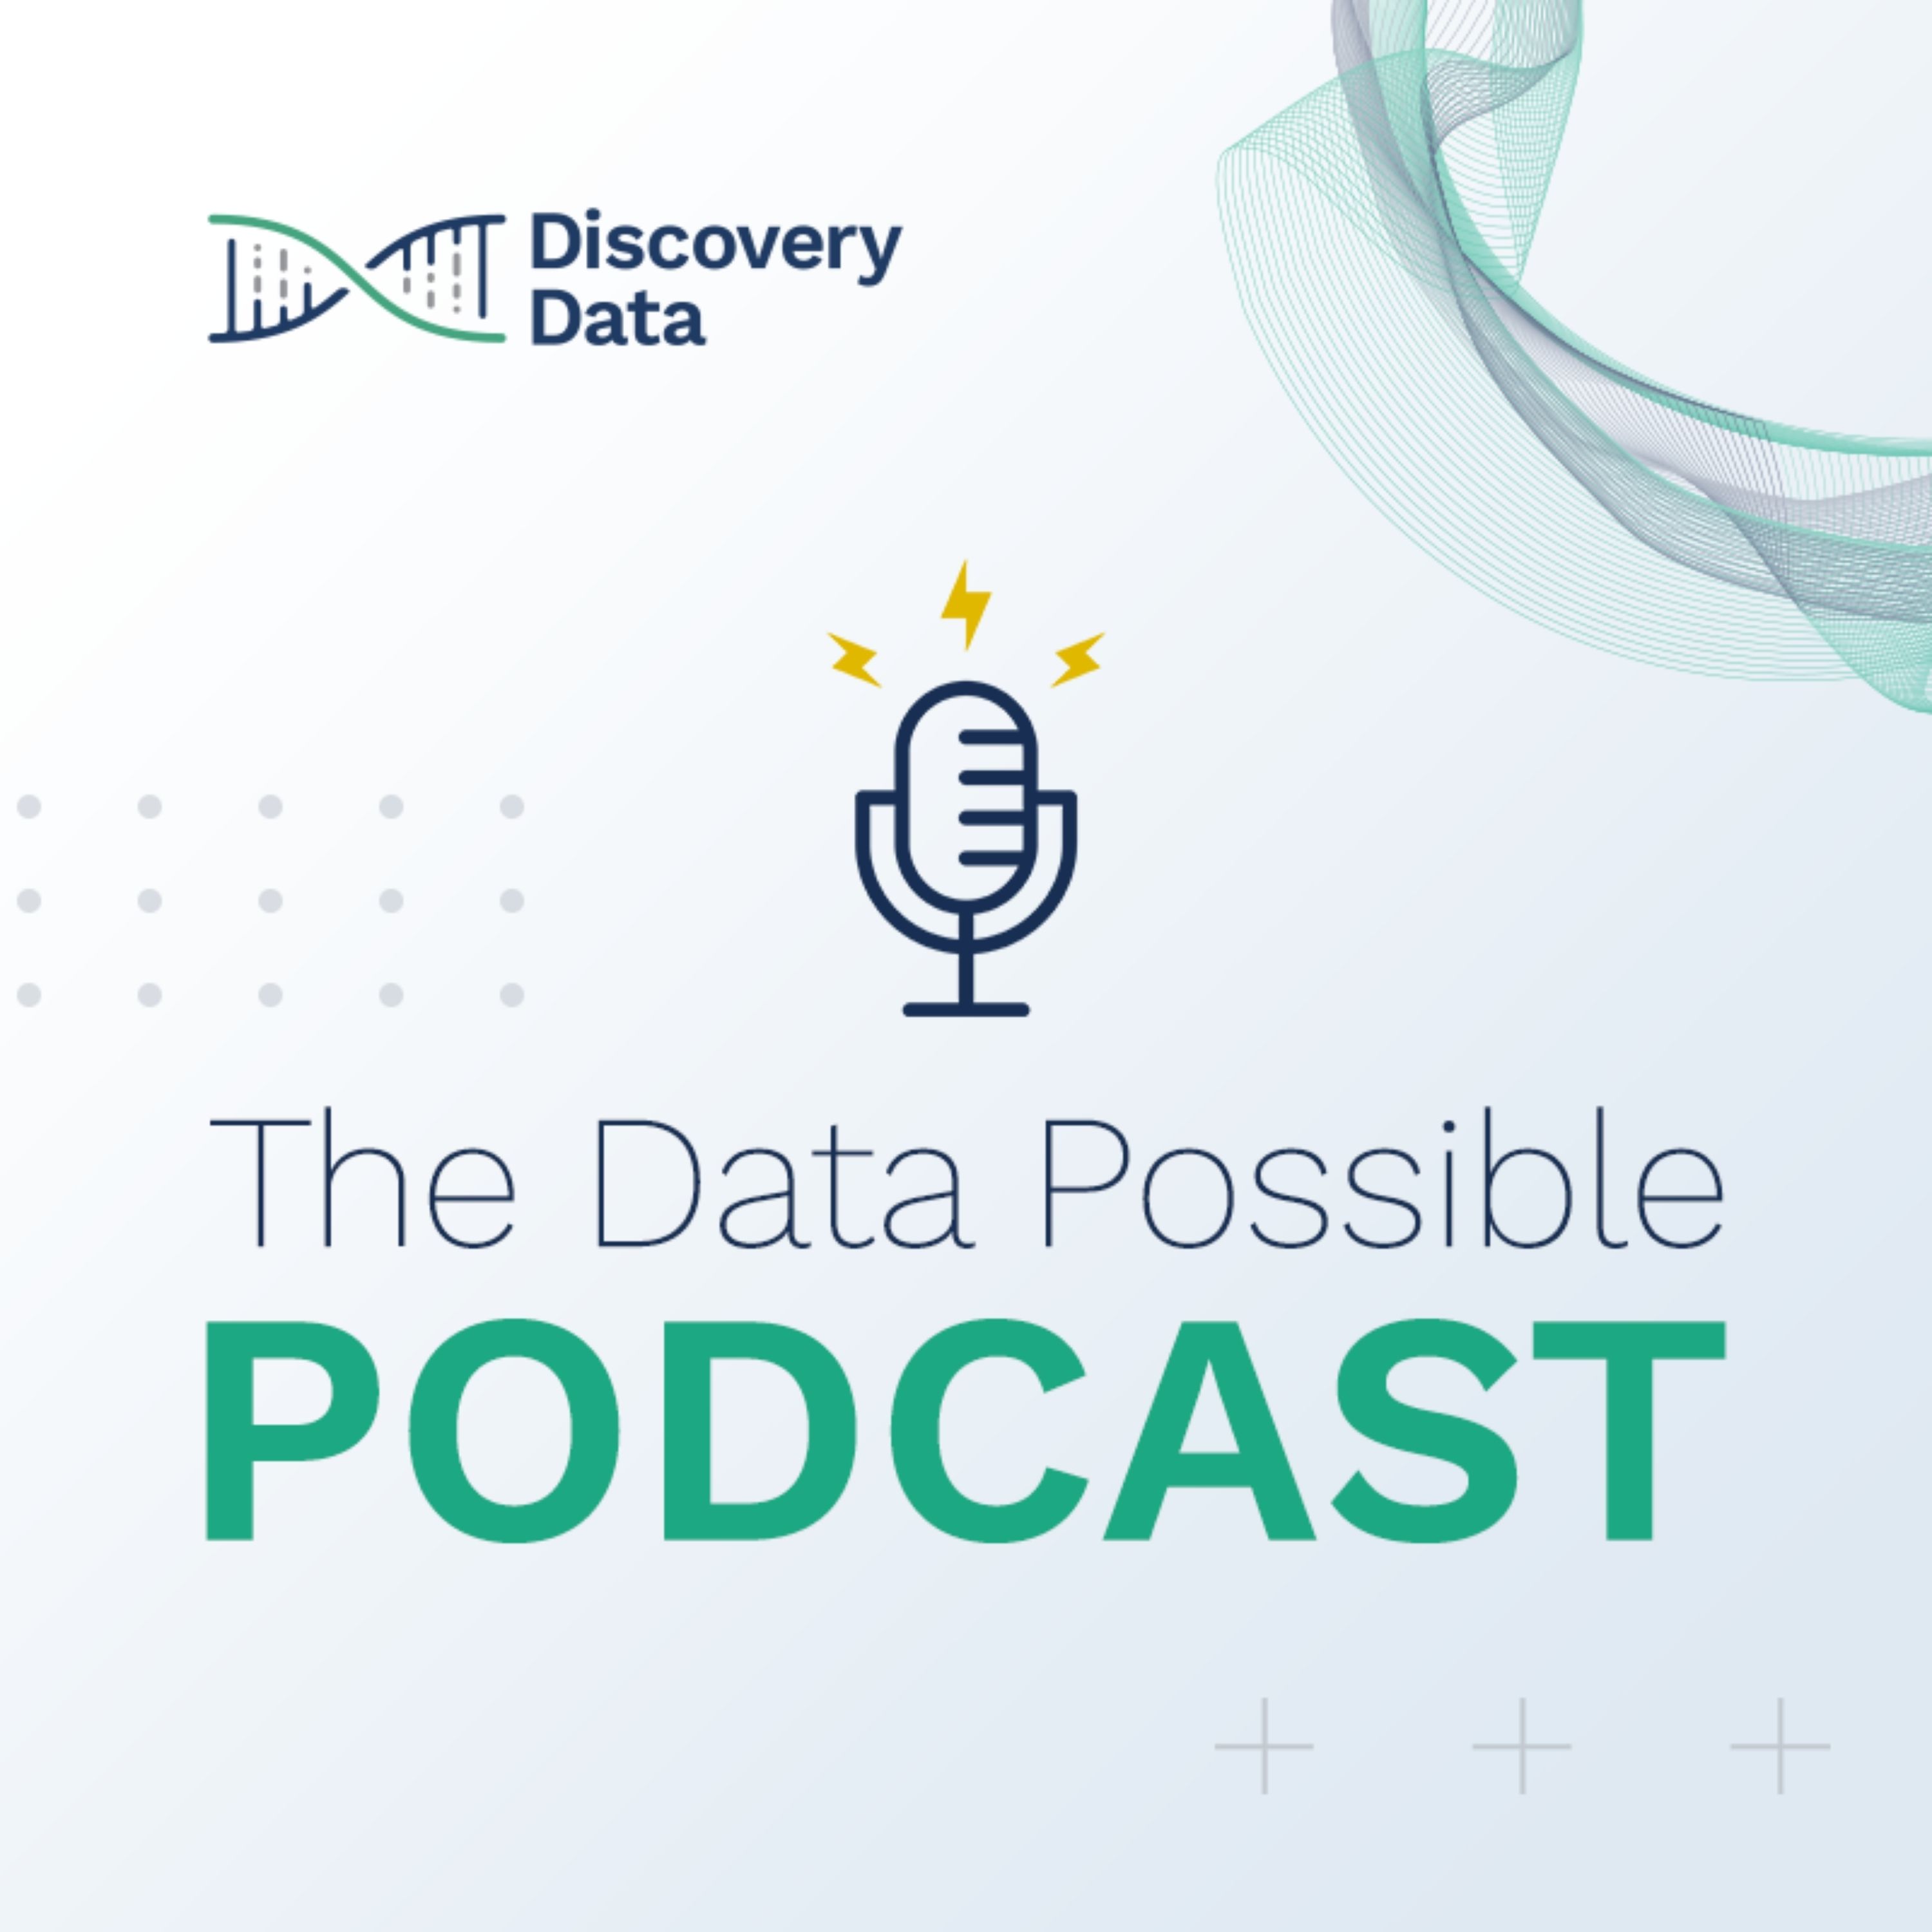 The Data Possible Podcast